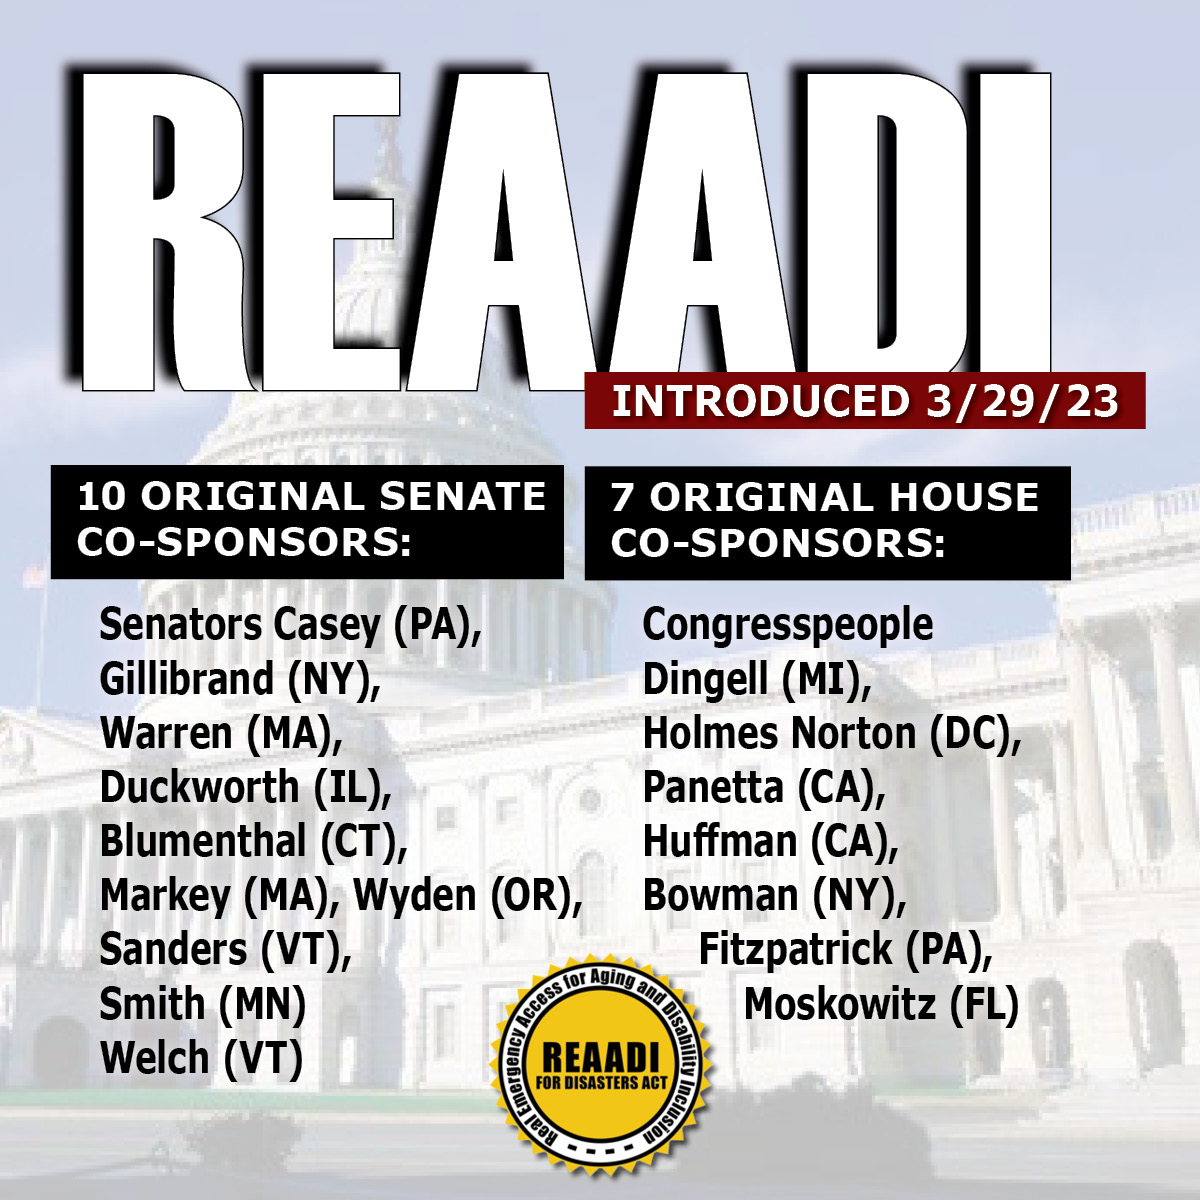 In the background is an image of the US Capitol with a blue sky above. Typography over it is: "REAADI, introduced 3/29/23. 10 Original Senate Co-Sponsors: Senators Casey (PA), Gillibrand (NY), Warren (MA), Duckworth (IL), Blumenthal (CT), Markey (MA), Wyden (OR), Sanders (VT), Smith (MN), Welch (VT). 7 Original House Co-Sponsors: Congresspeople Dingell (MI), Holmes Norton (DC), Panetta (CA), Huffman (CA), Bowman (NY), Fitzpatrick (PA), Moskowitz (FL)" The REAADI sun logo is at the bottom, with the words around the sun: "Real Emergency Access for Aging and Disability Inclusion."